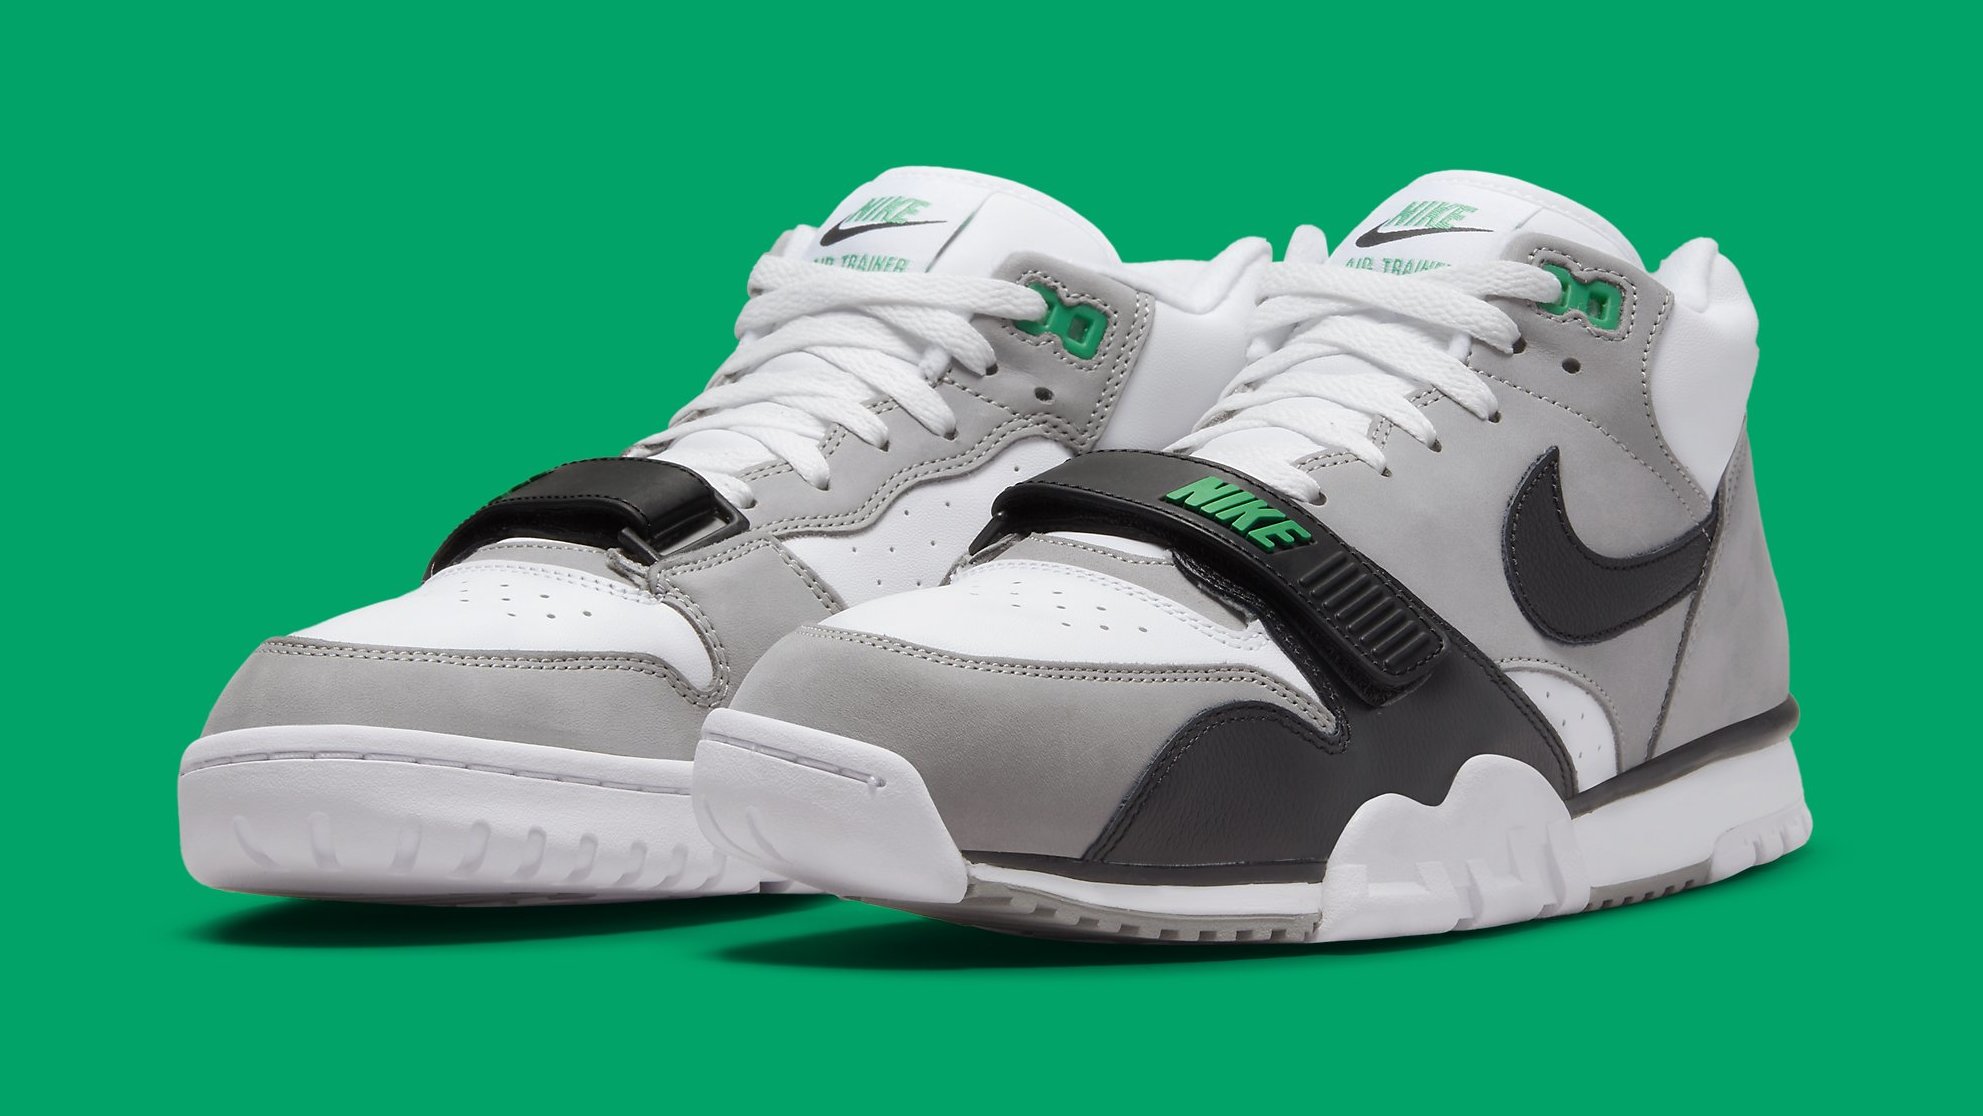 Chlorophyll' Nike Air Trainer 1s Are Returning This Month | Complex